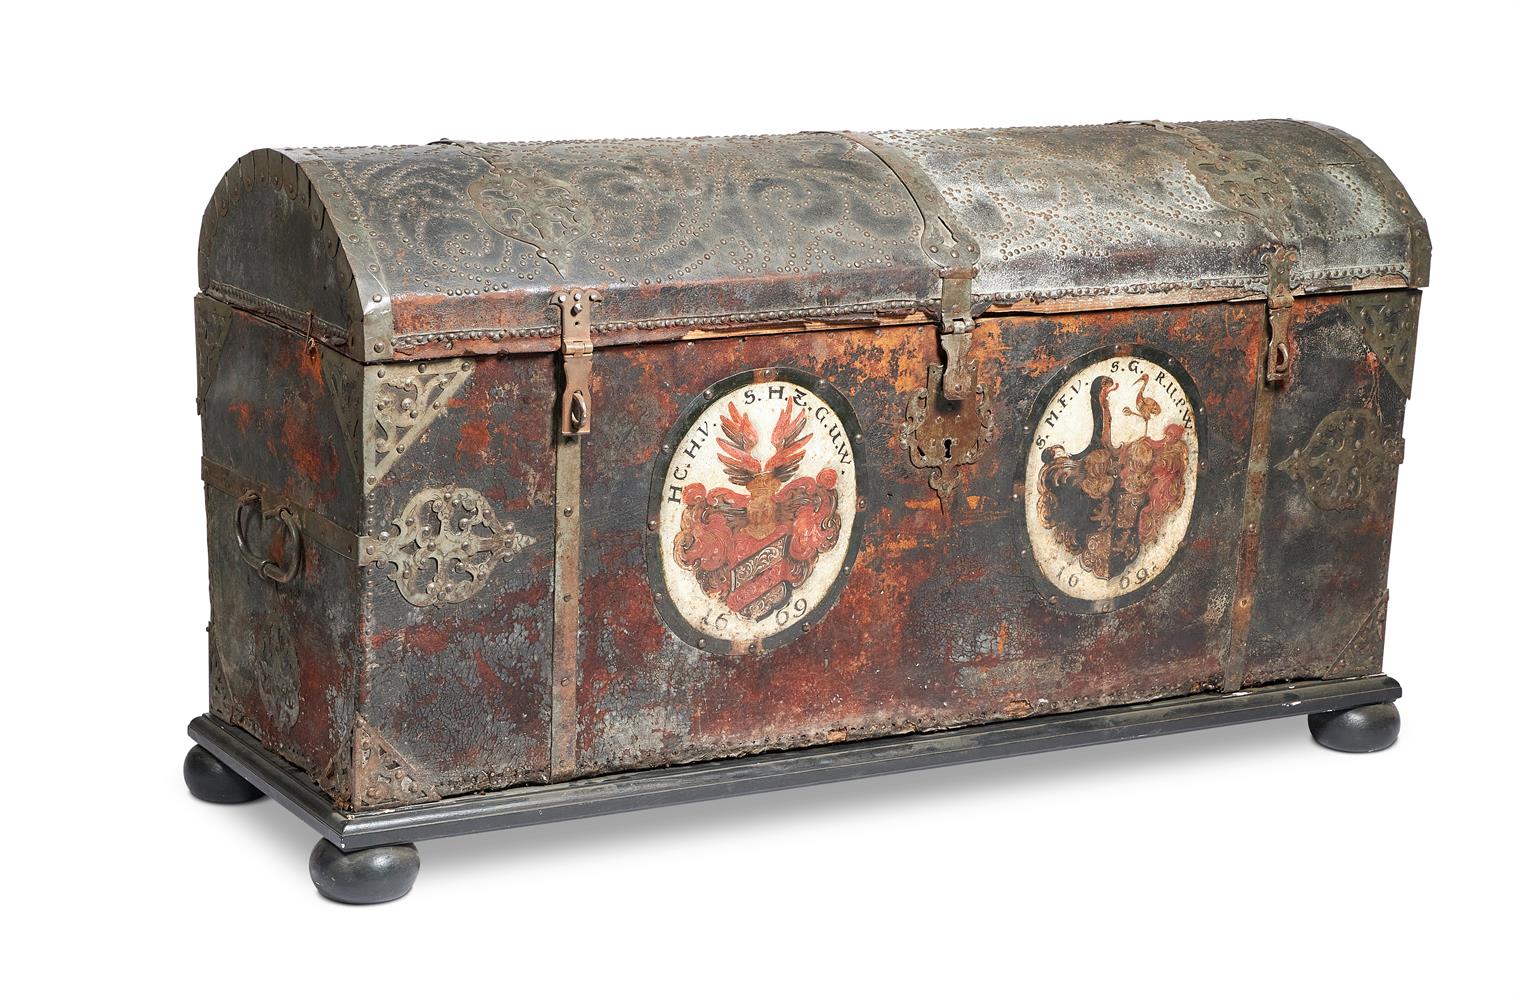 A PAIR OF GERMAN IRON MOUNTED LEATHER CHESTS, LATE 17TH CENTURY - Image 2 of 6